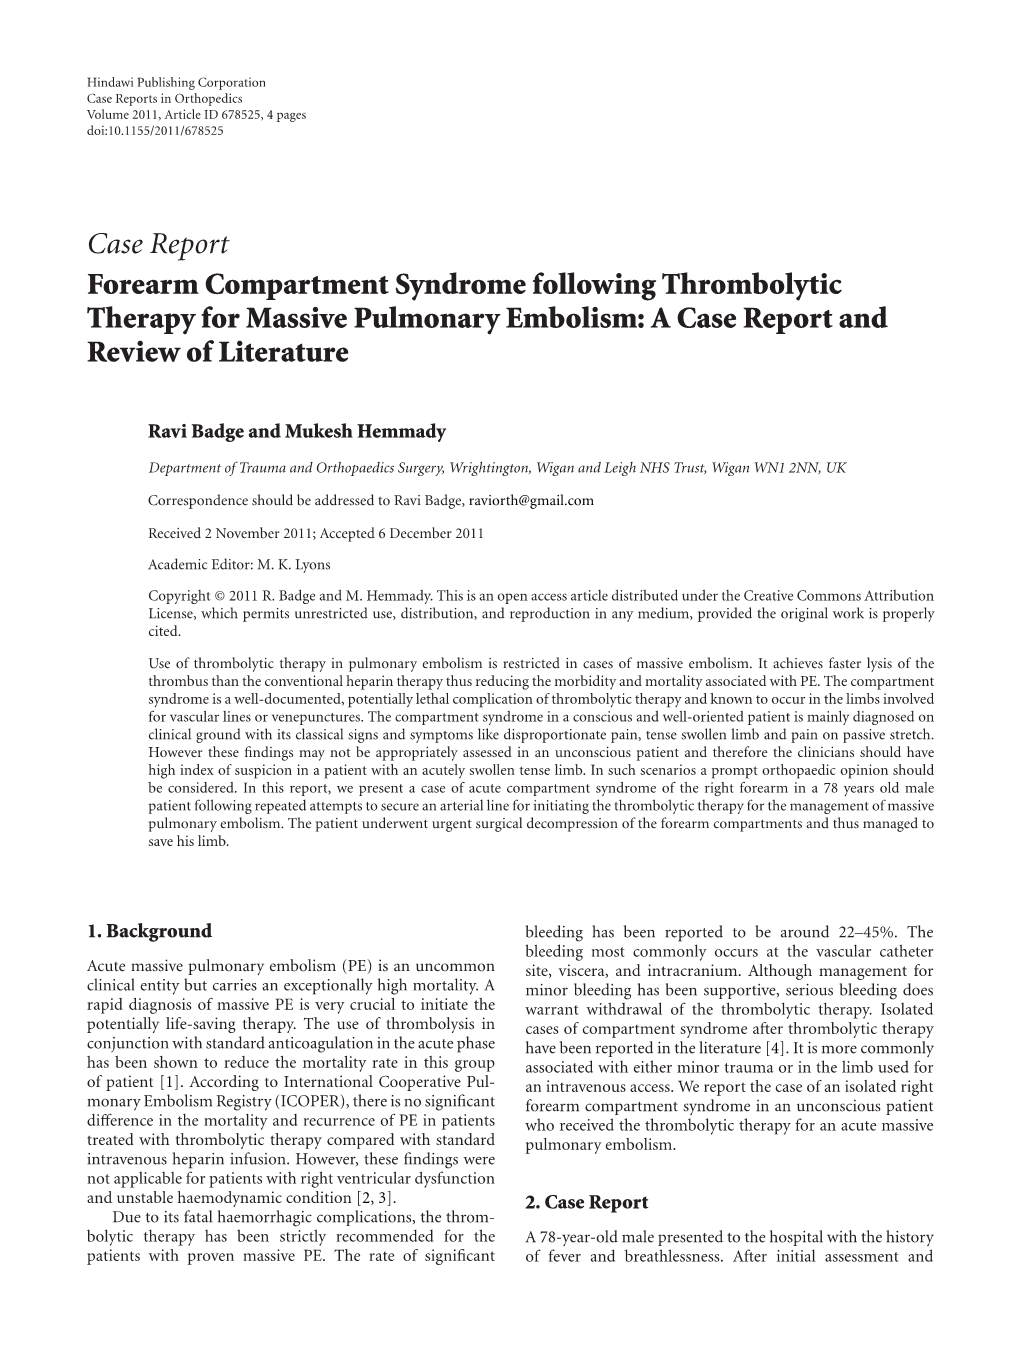 Case Report Forearm Compartment Syndrome Following Thrombolytic Therapy for Massive Pulmonary Embolism: a Case Report and Review of Literature